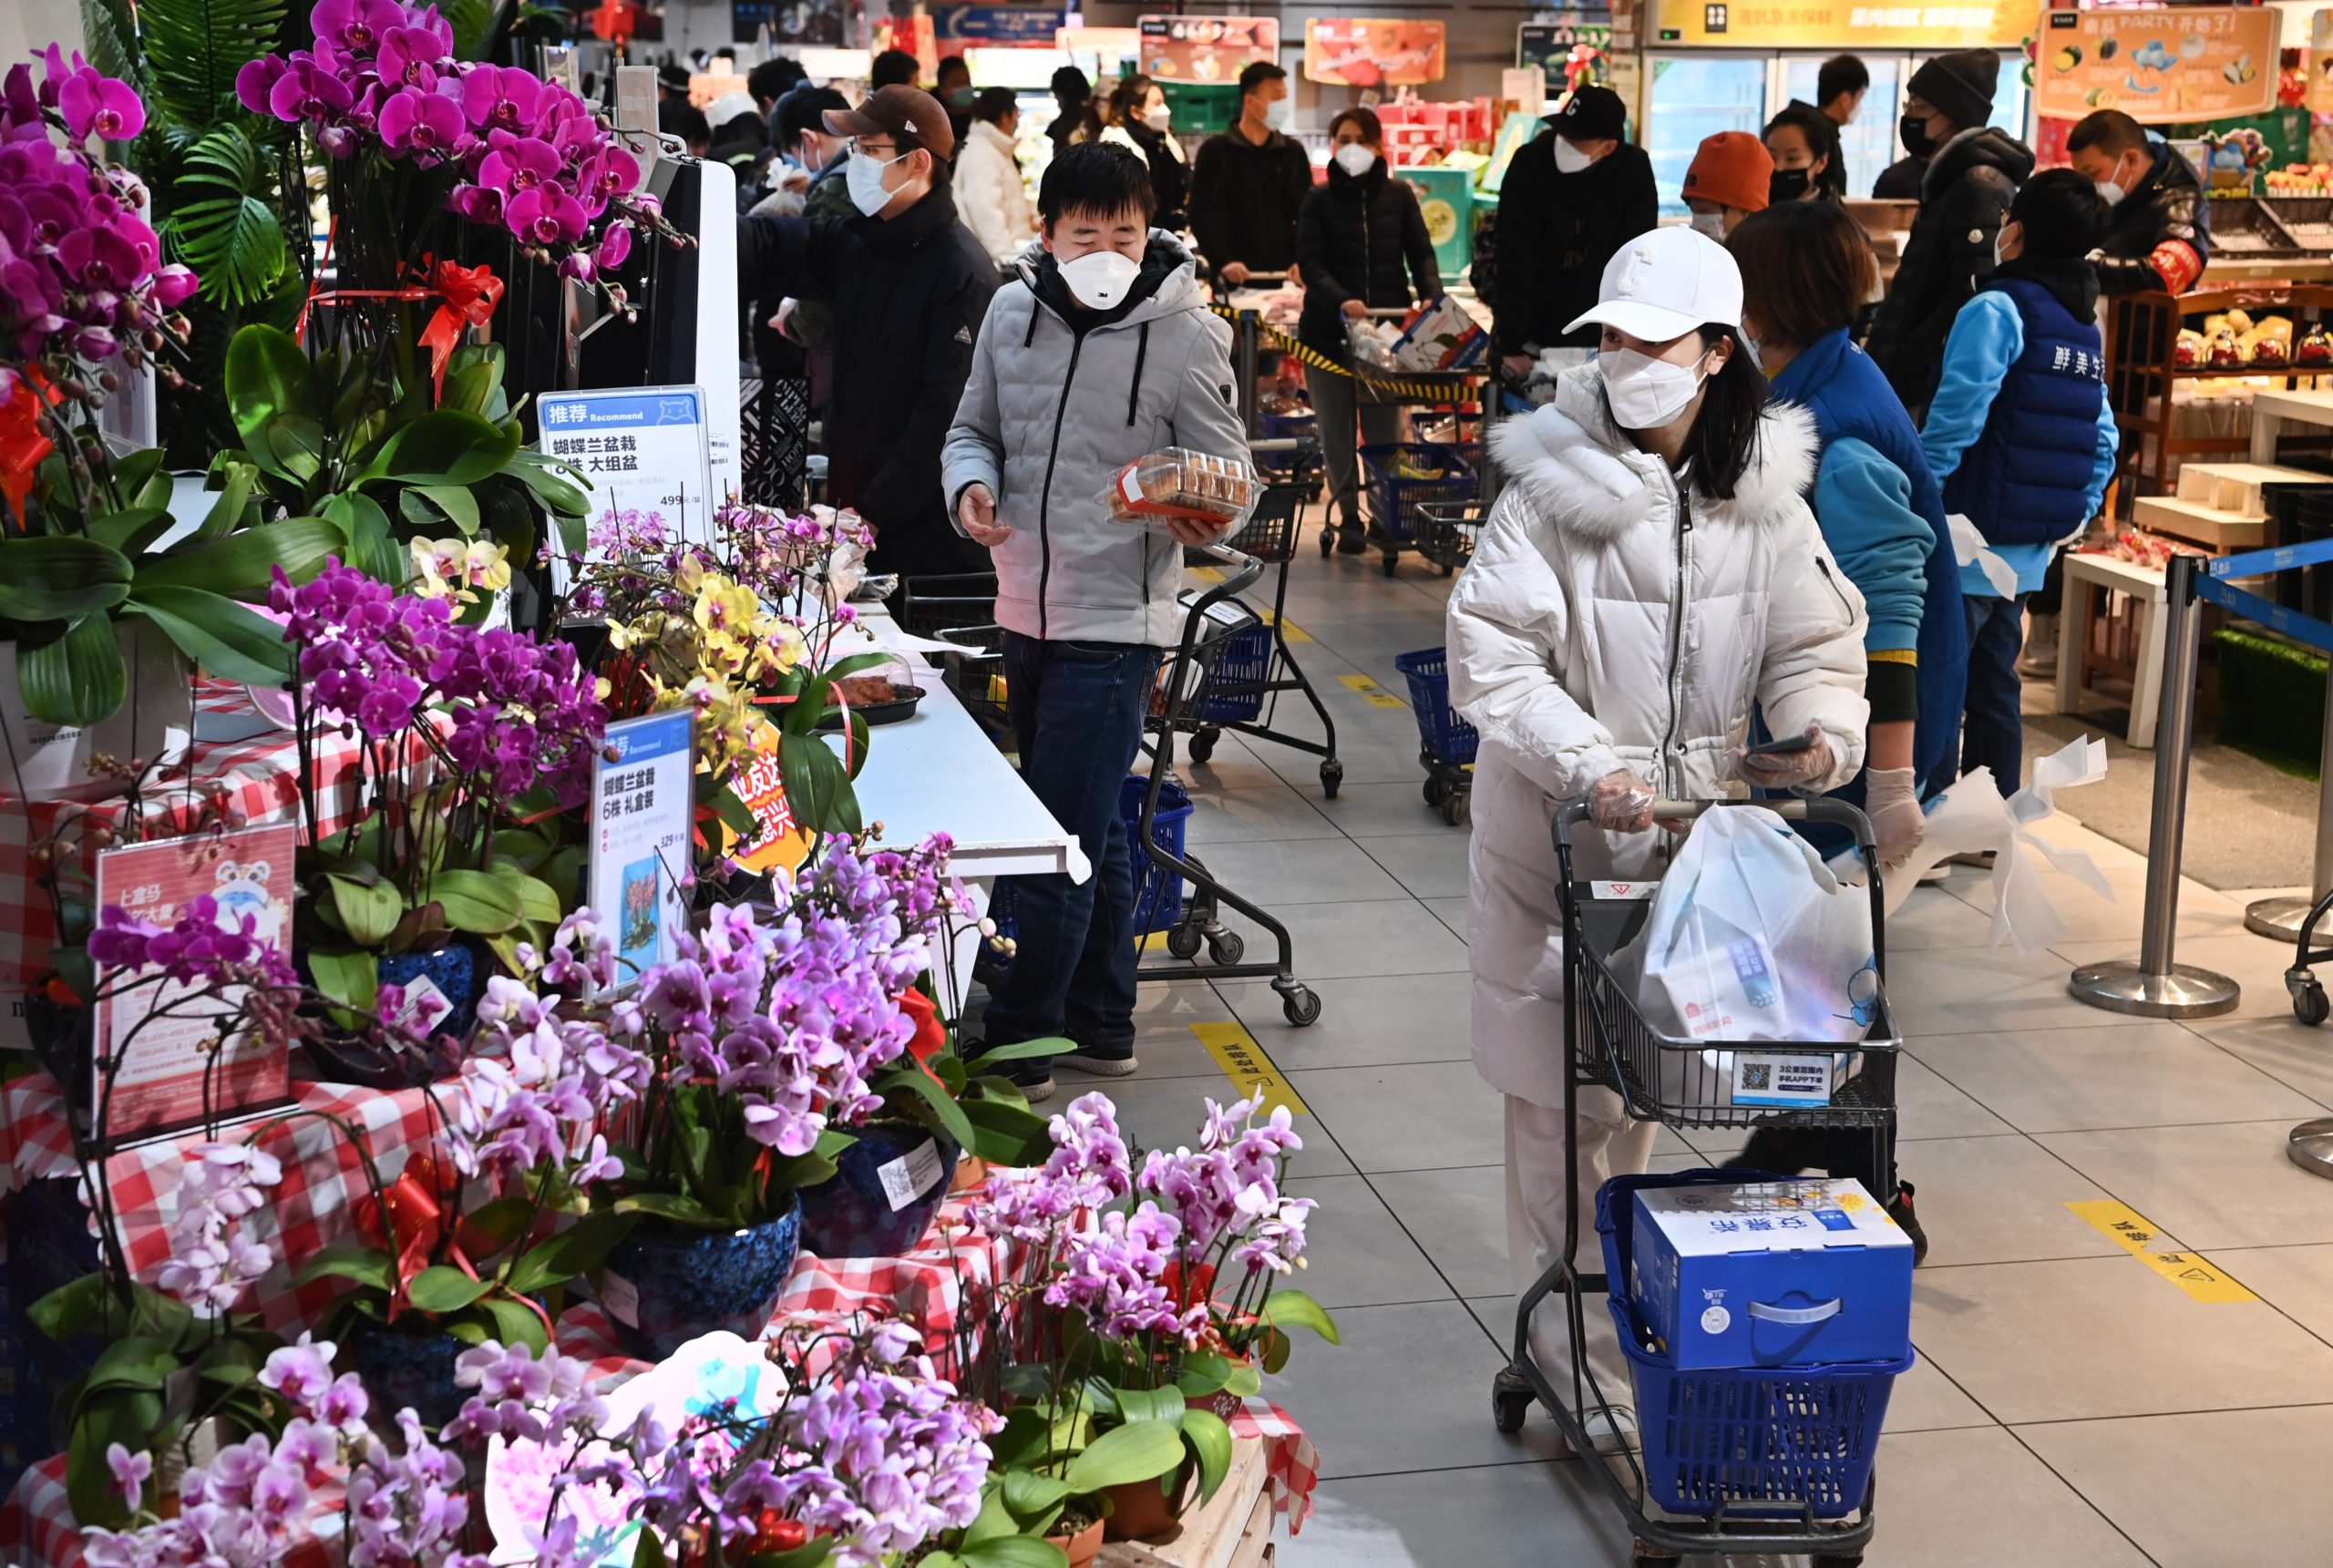 Residents shop at a supermarket in Qujiang New District of Xian, northwest China's Shaanxi Province, Jan. 15, 2022.  (Photo: Tao Ming, Getty Images)